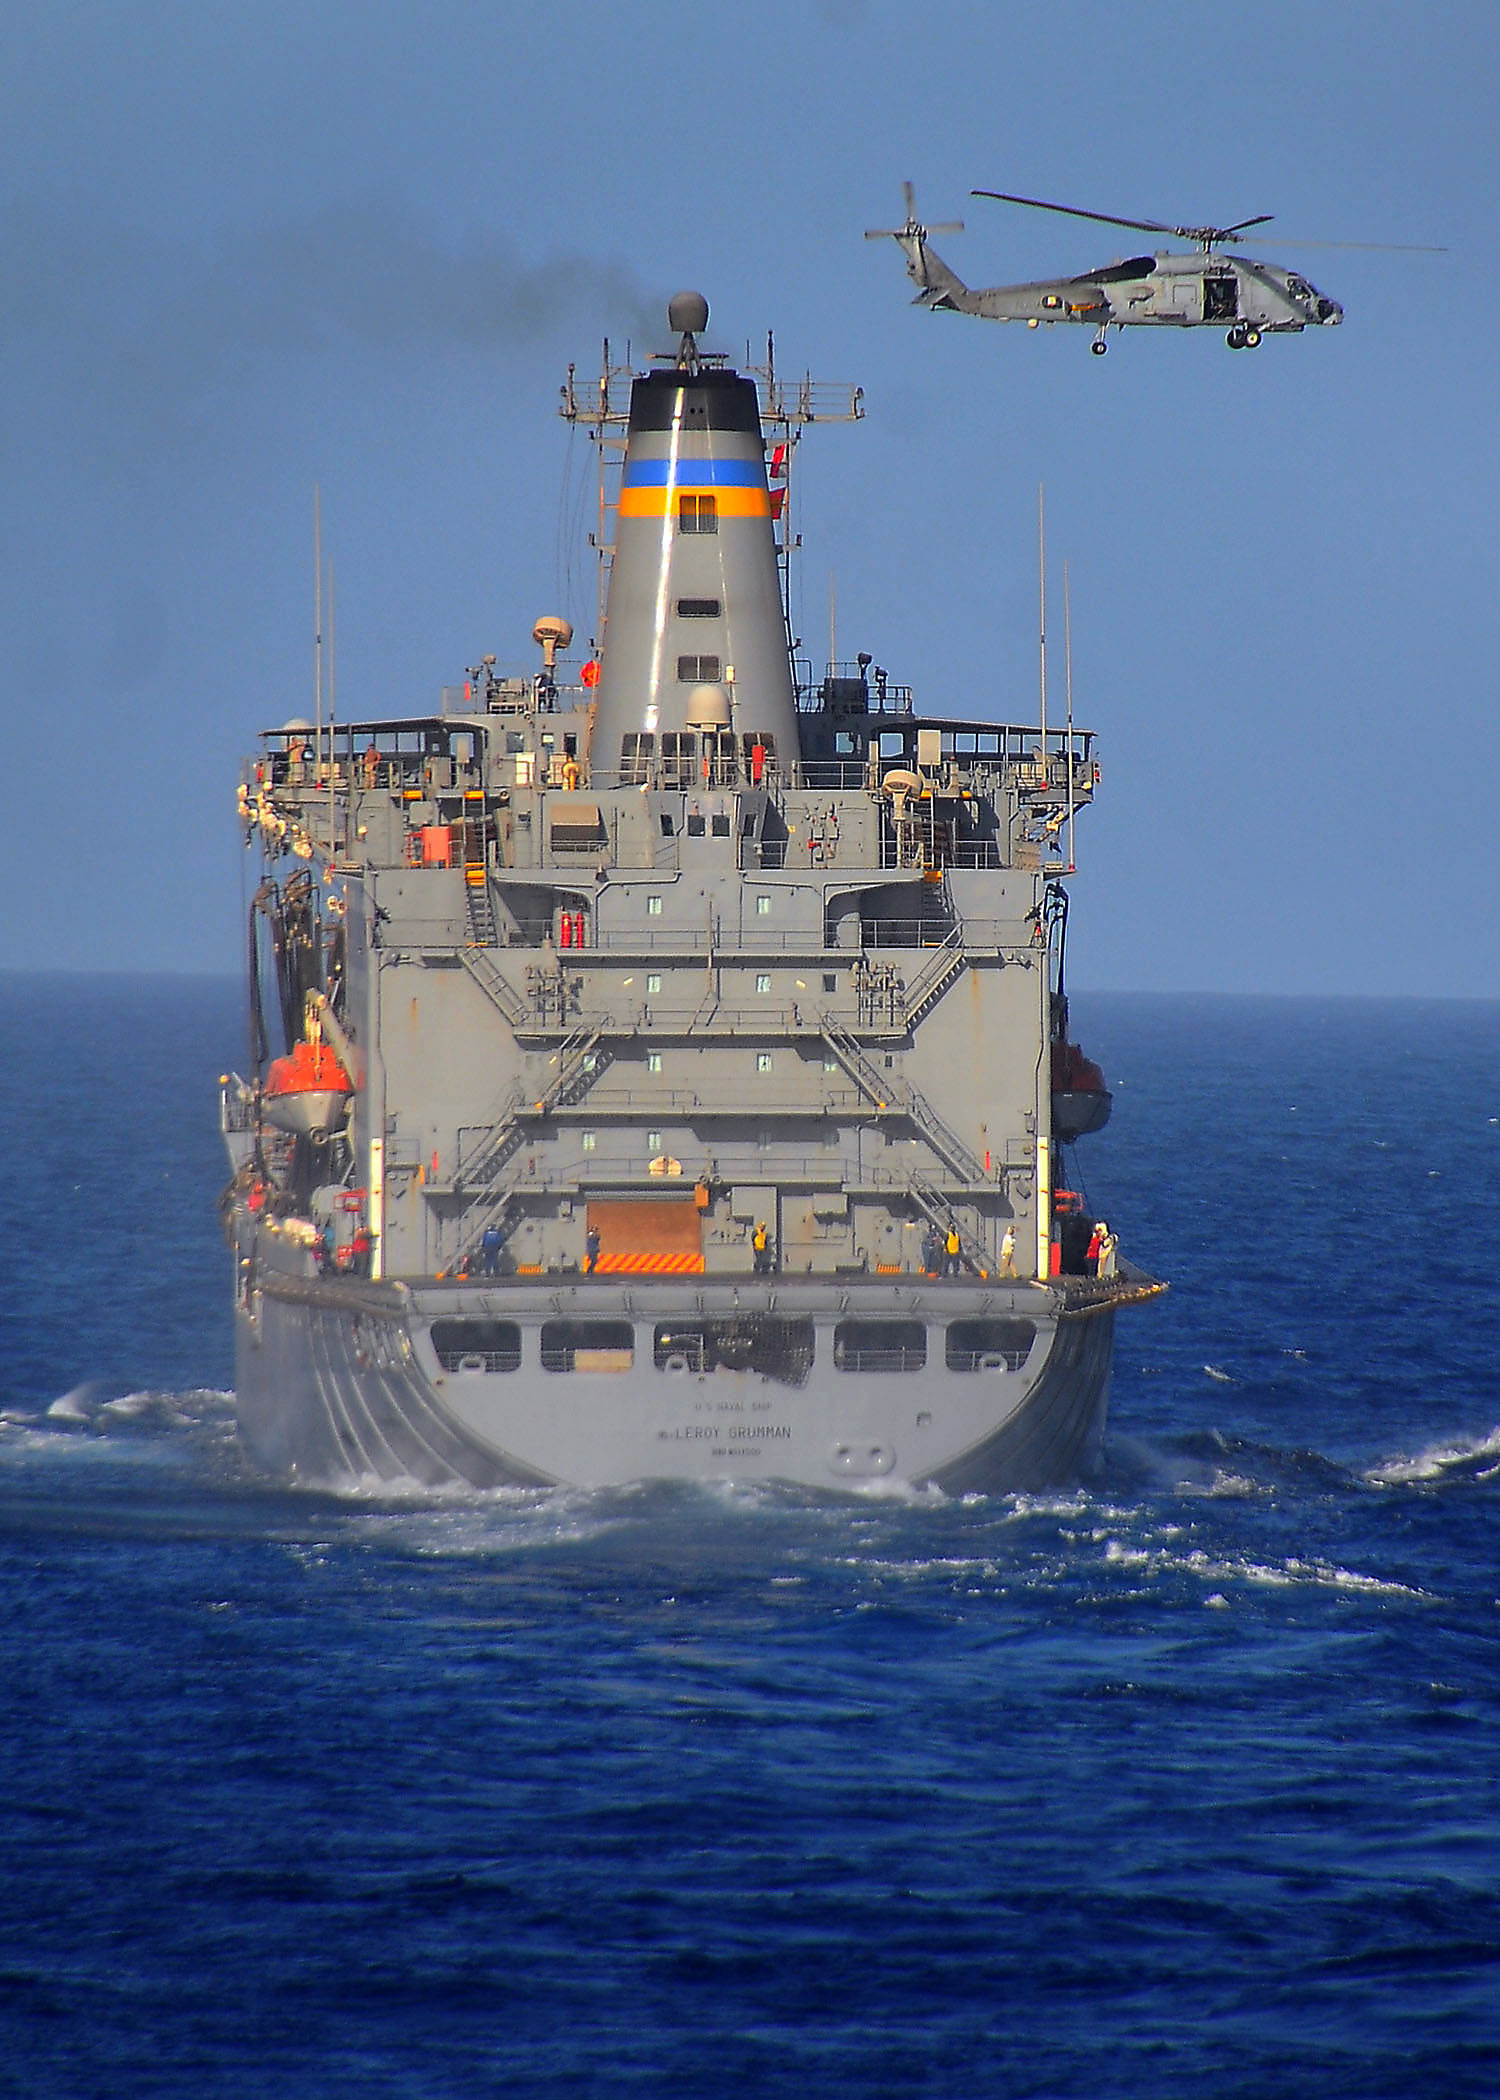 US Navy 090616-N-4774B-140 An SH-60B helicopter, assigned to the Wolfpack of Helicopter Squadron Light (HSL) 45, lifts off from the Military Sealift Command fleet replenishment oiler USNS Leroy Grumman (T-AO 195)